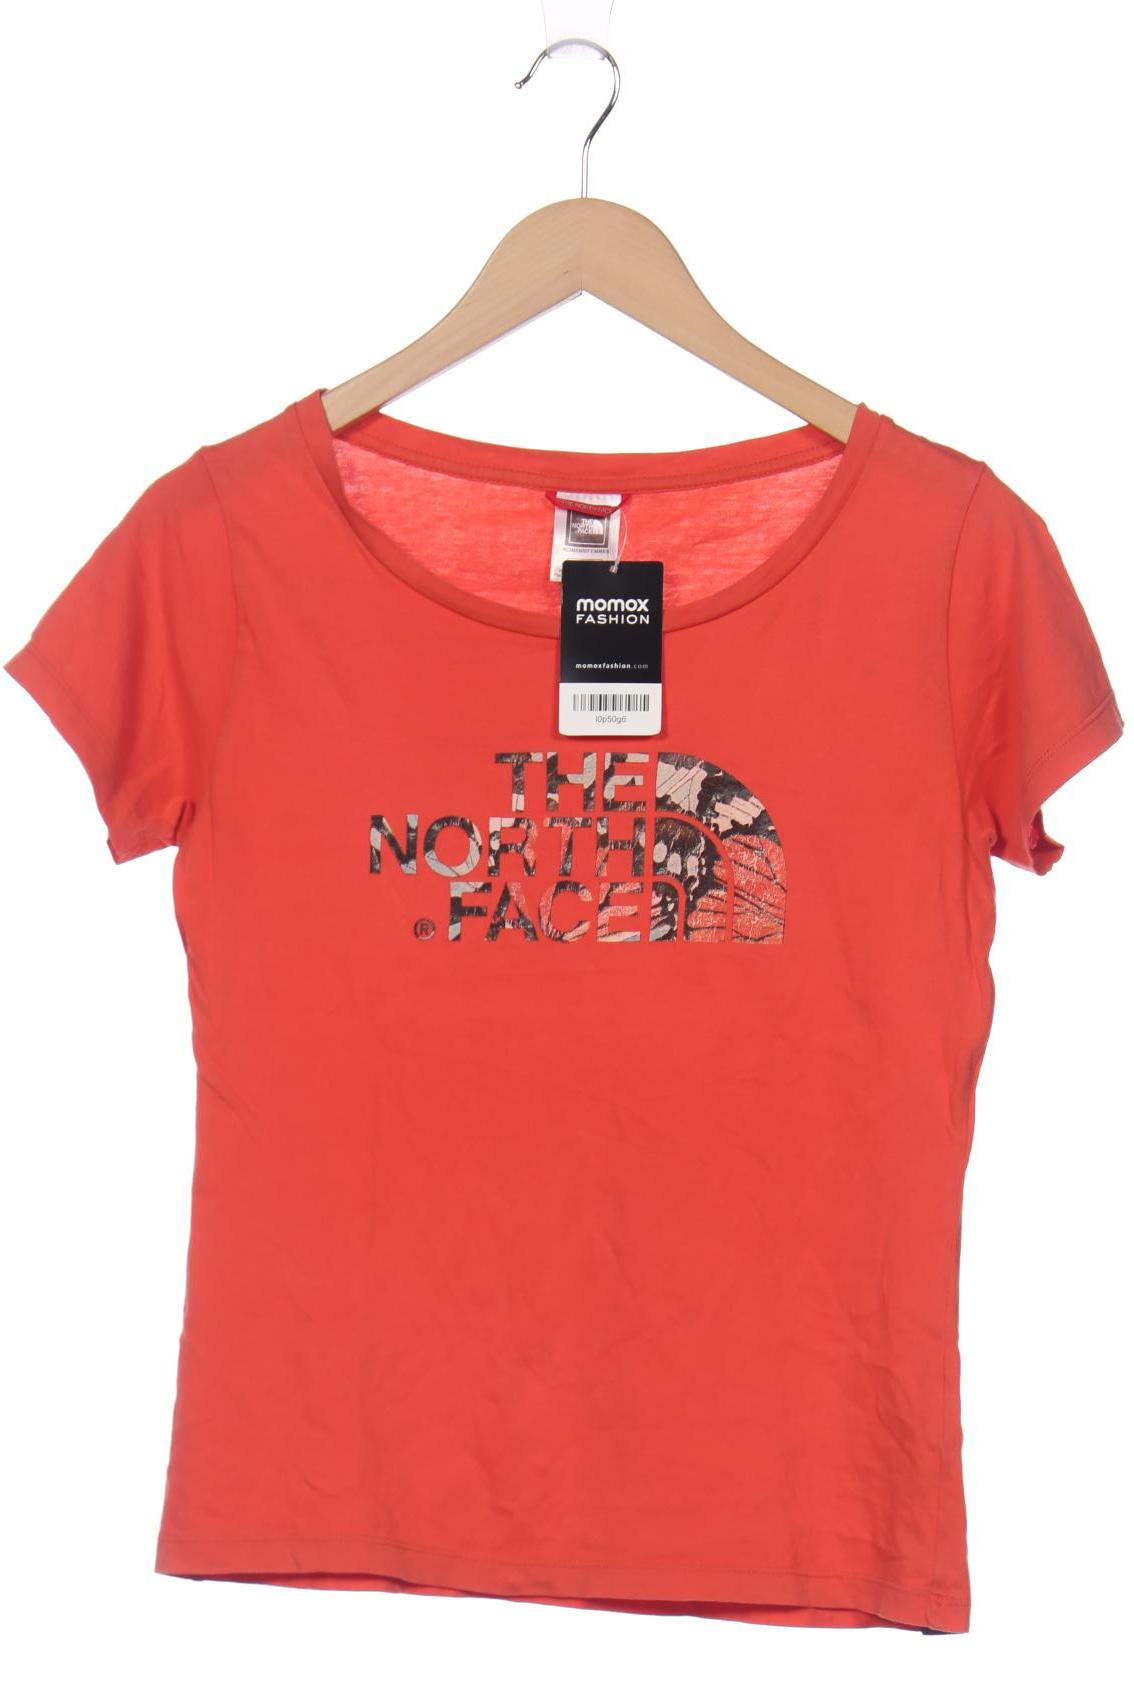 The North Face Damen T-Shirt, rot, Gr. 38 von The North Face